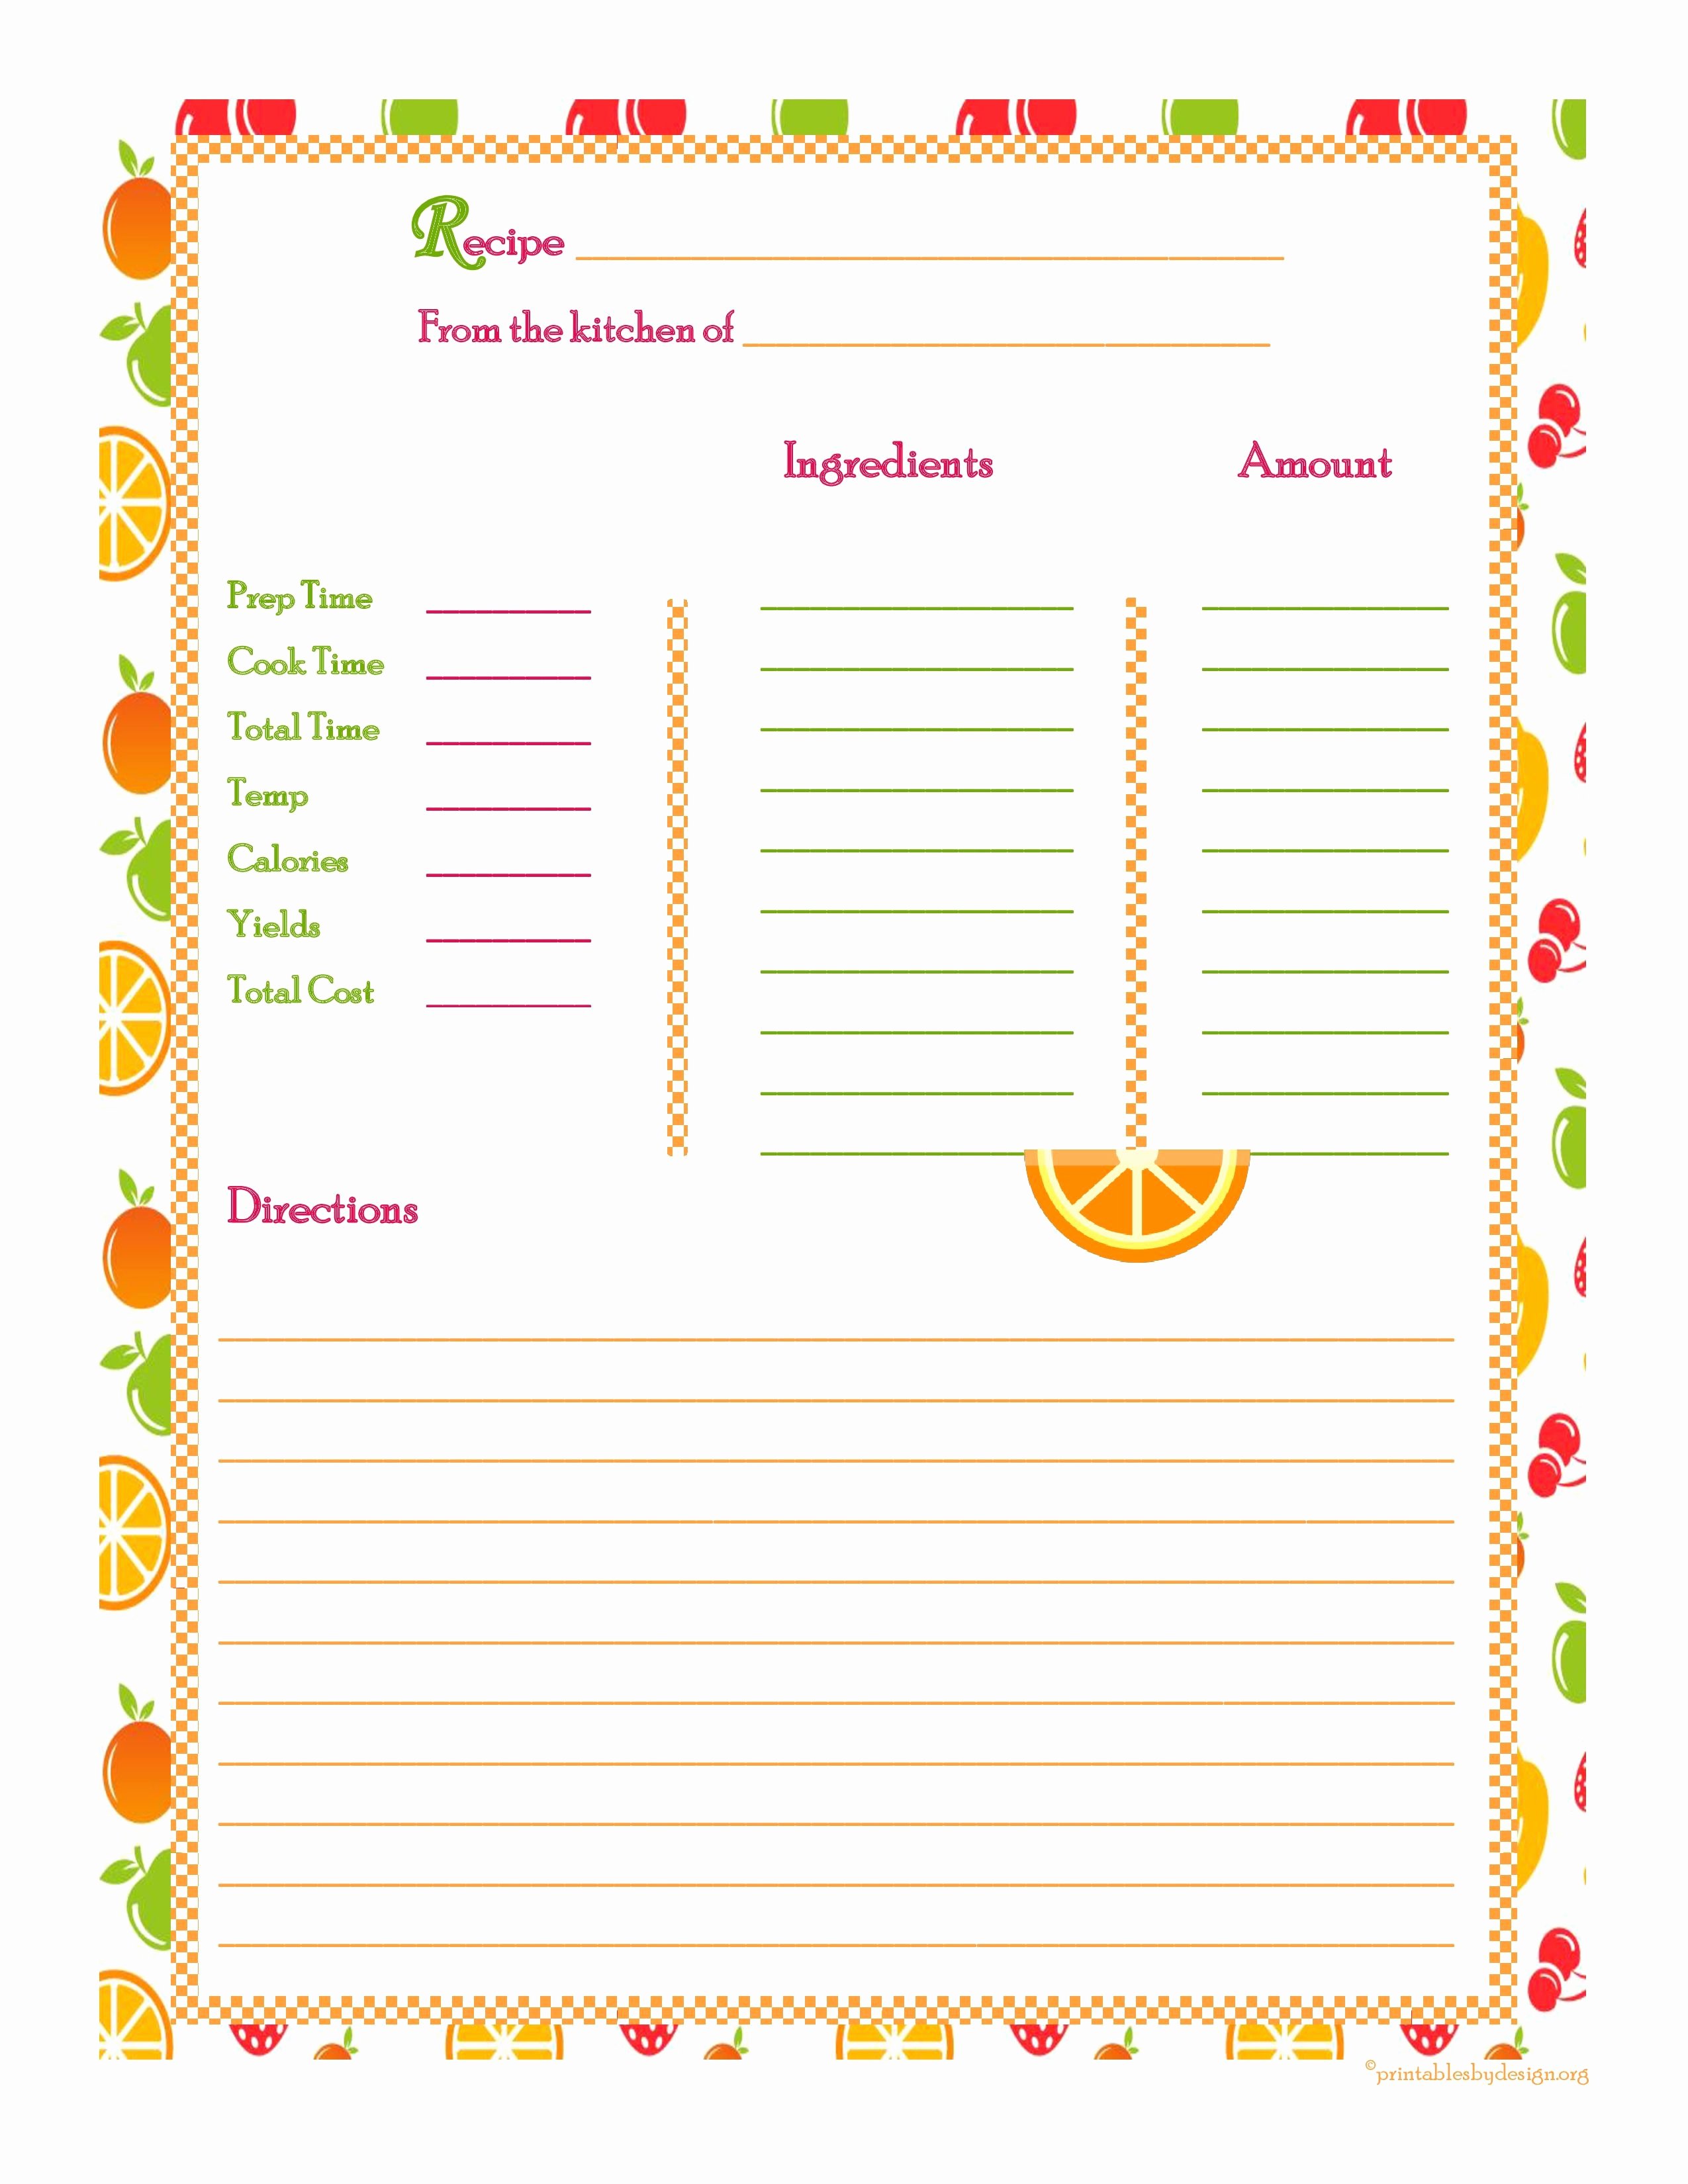 Recipe Template for Mac New Recipe Book Template Apple Pages